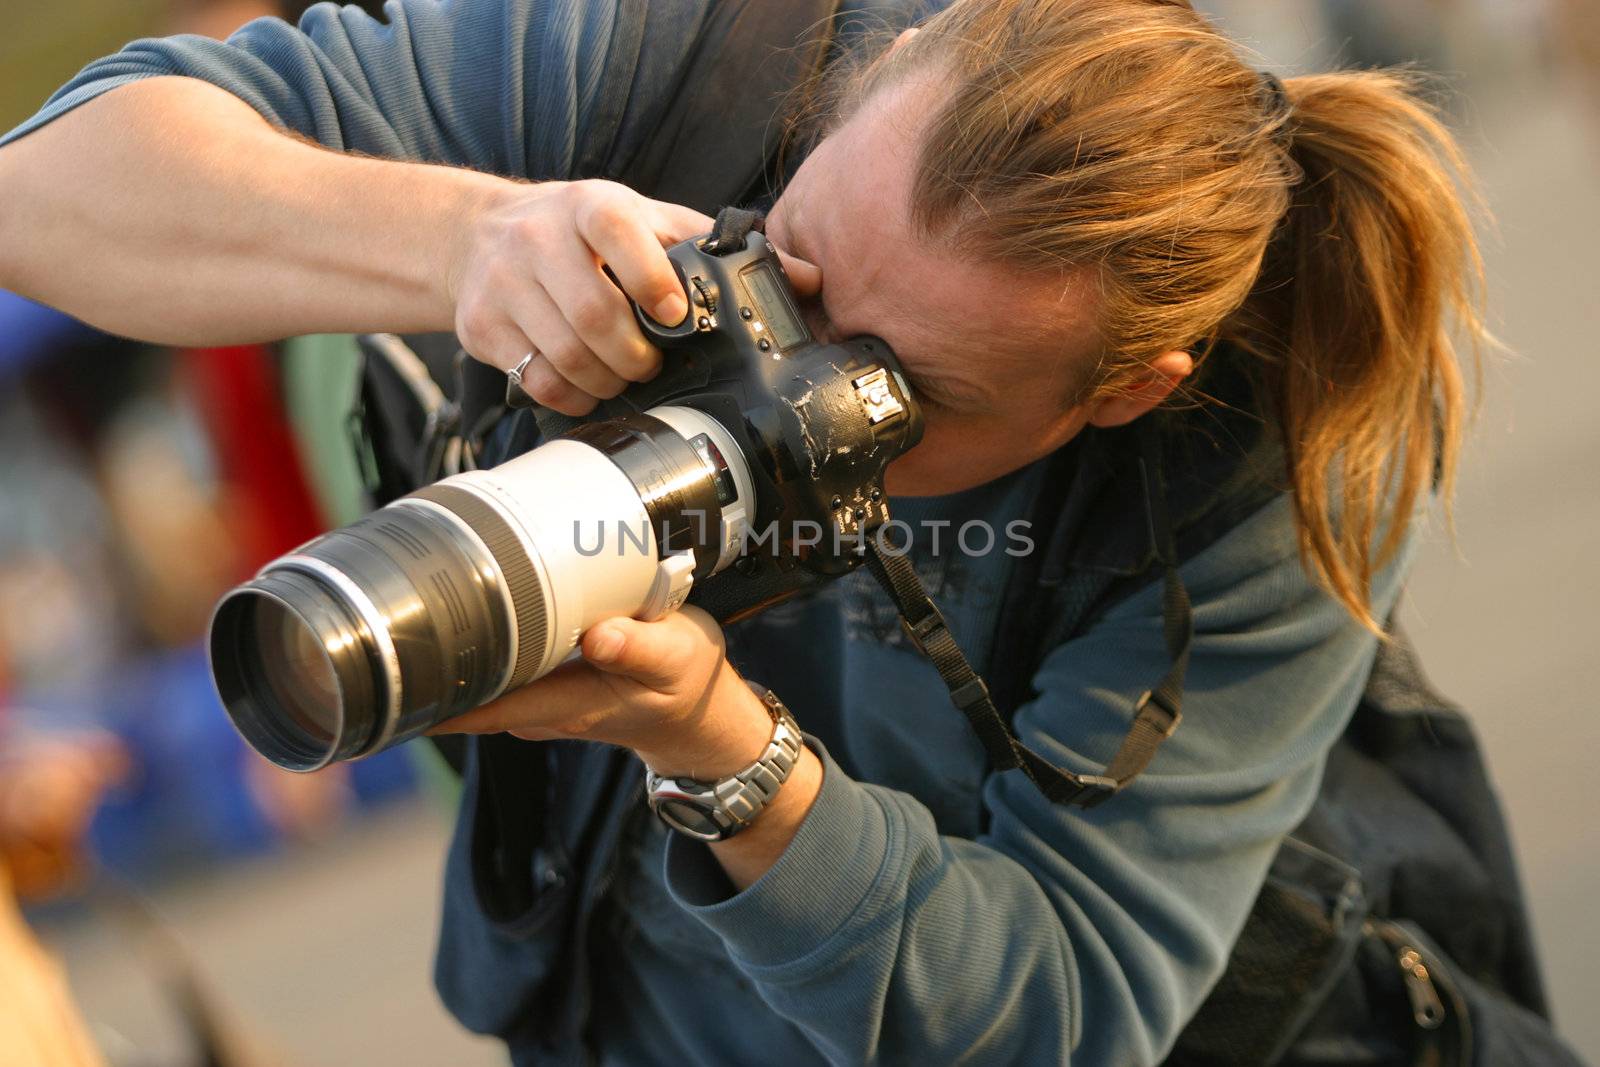 The professional photographer is keen on work